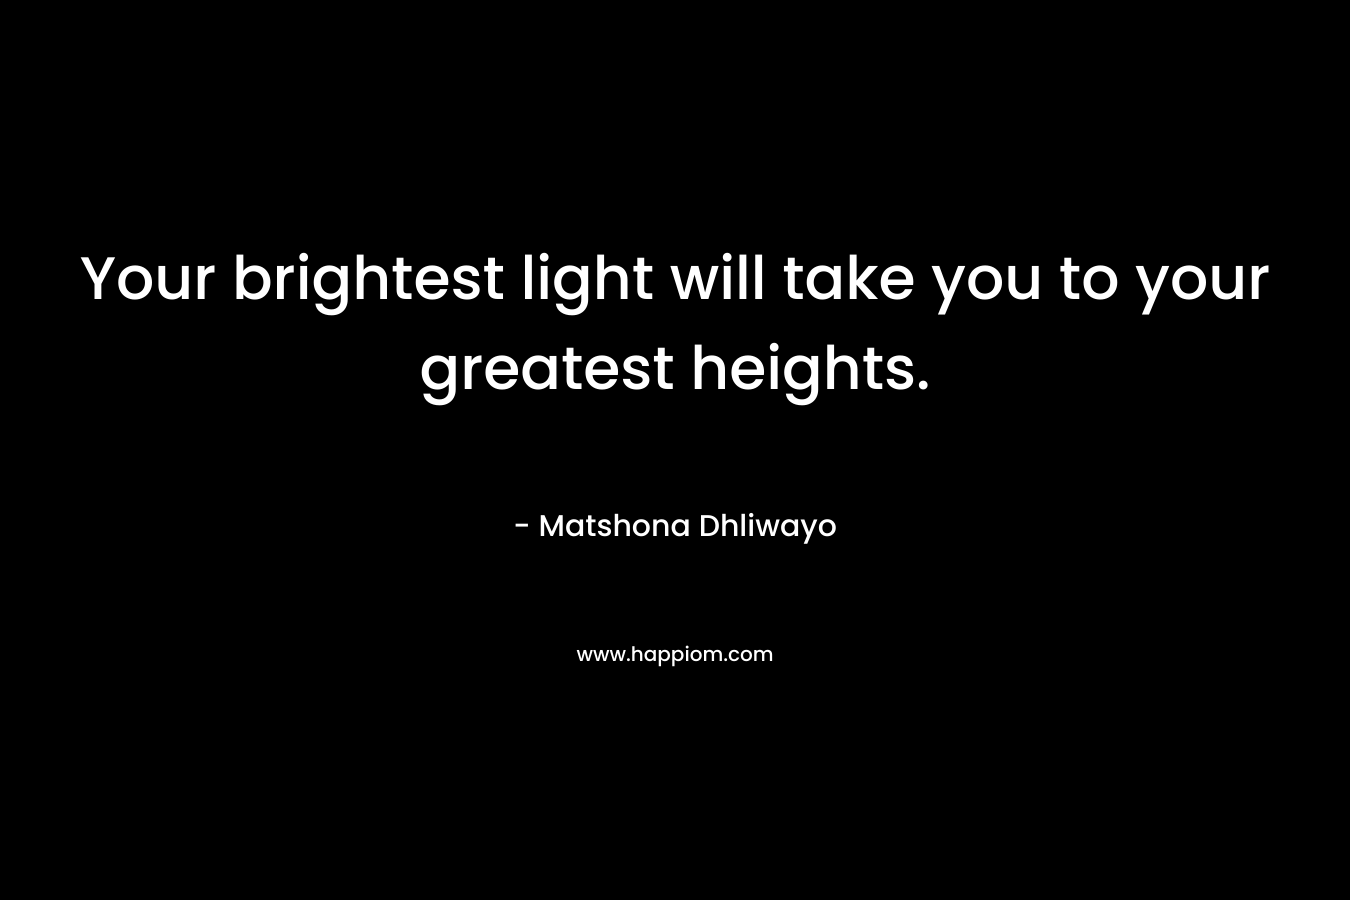 Your brightest light will take you to your greatest heights.